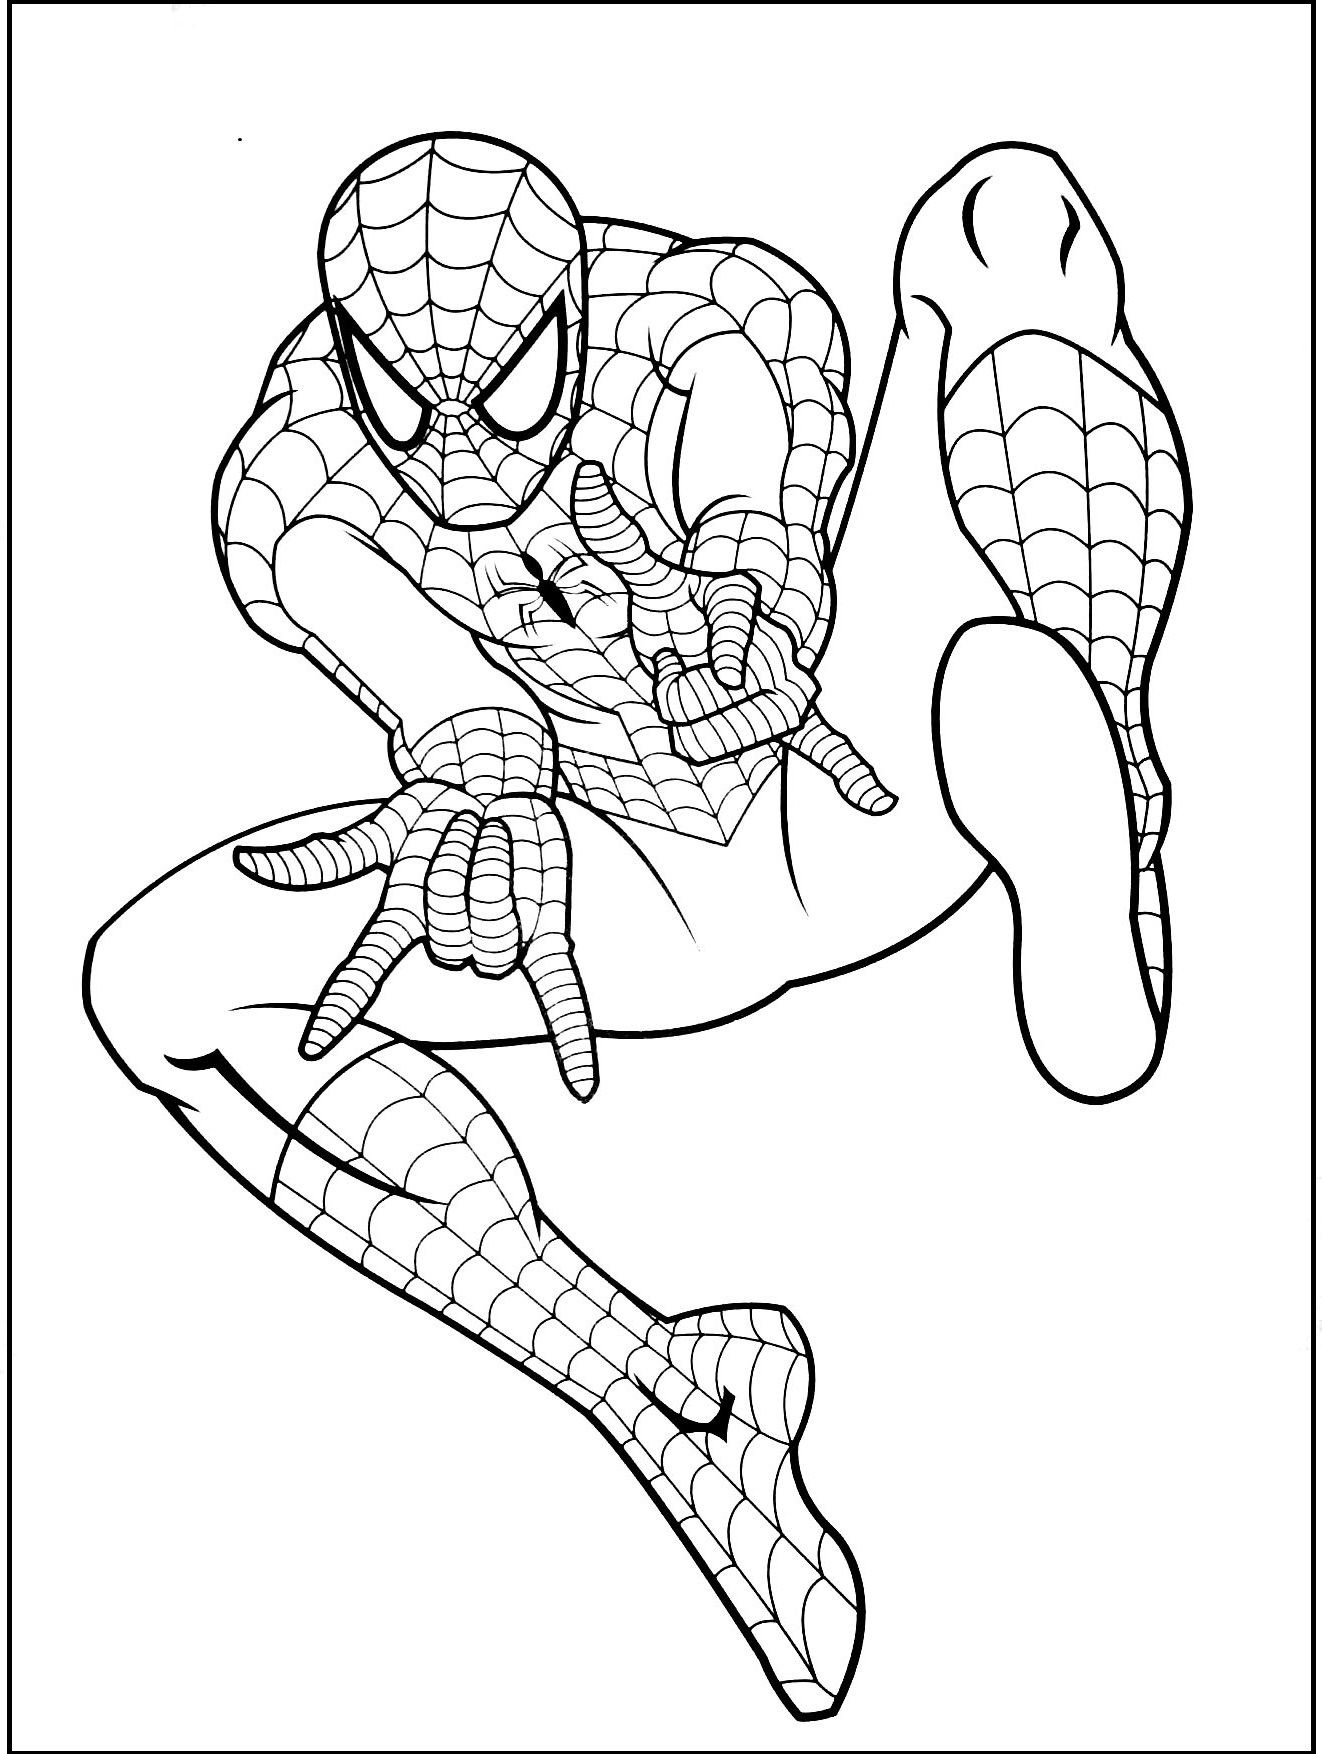 Spiderman Coloring Pages For Toddlers
 Spiderman Gratuit coloring picture for kids